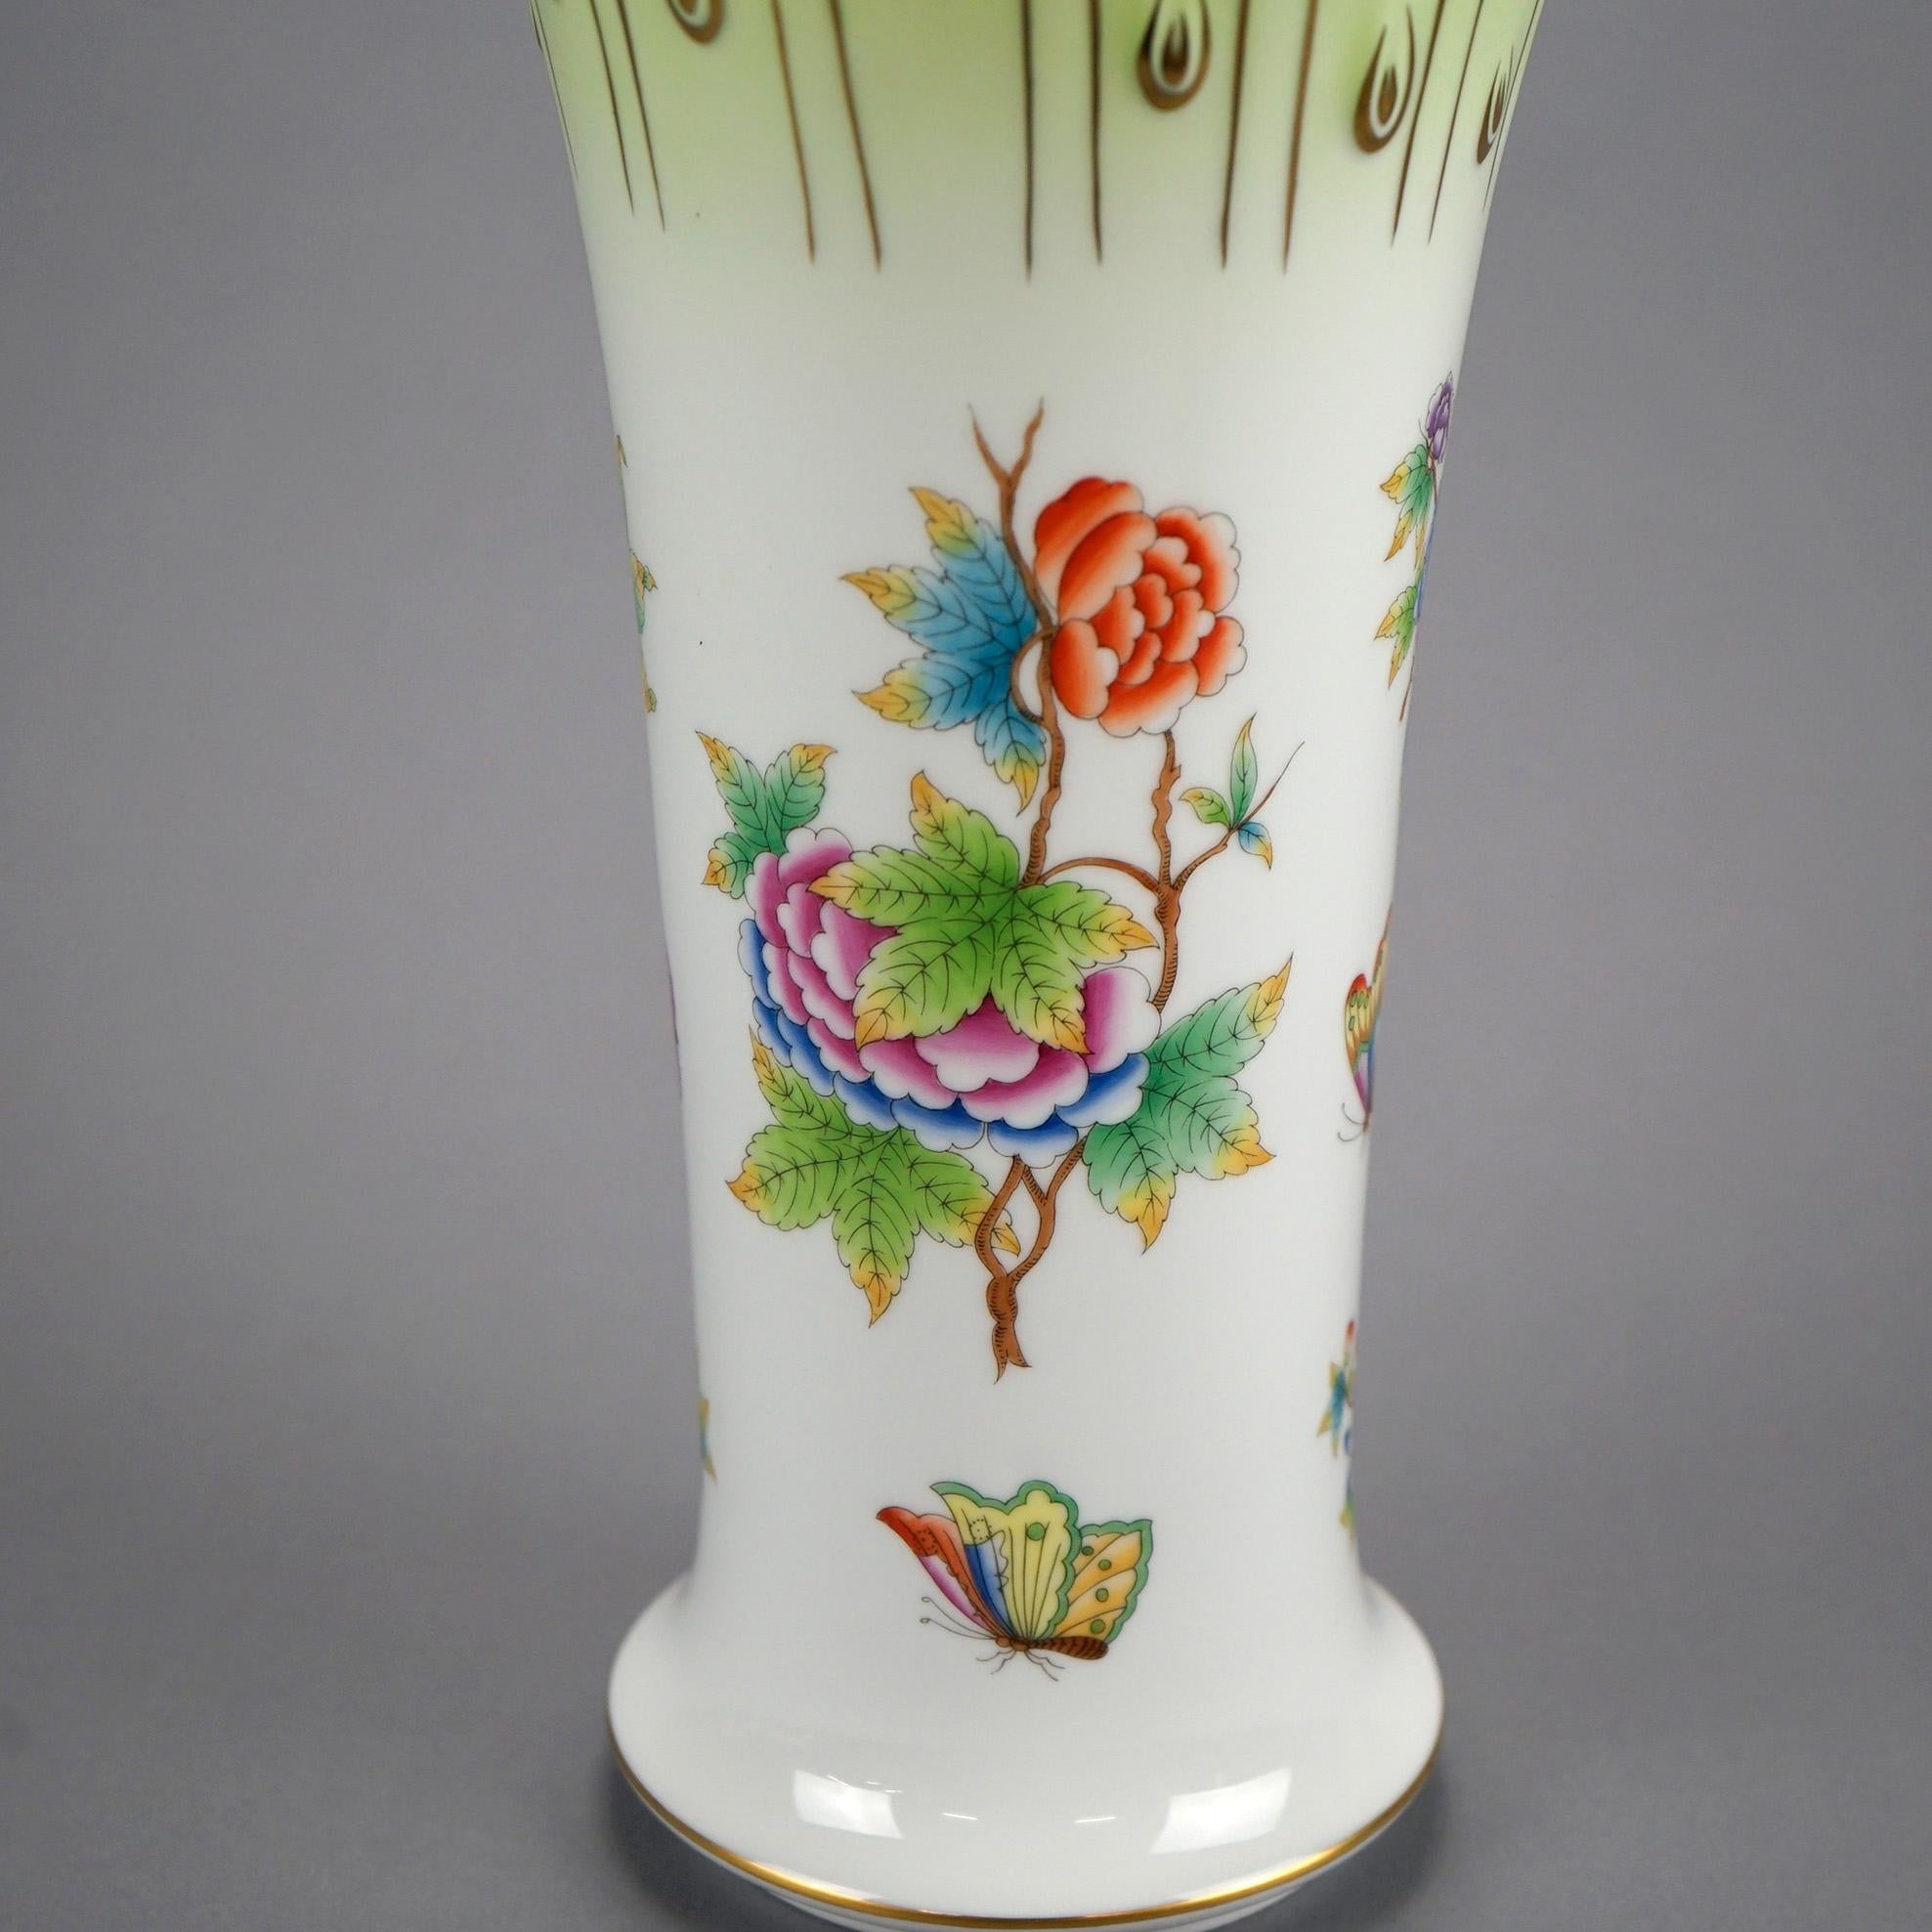 Large Herend Porcelain Decorated Vase, Flower Garden with Butterflies, 20th C 2